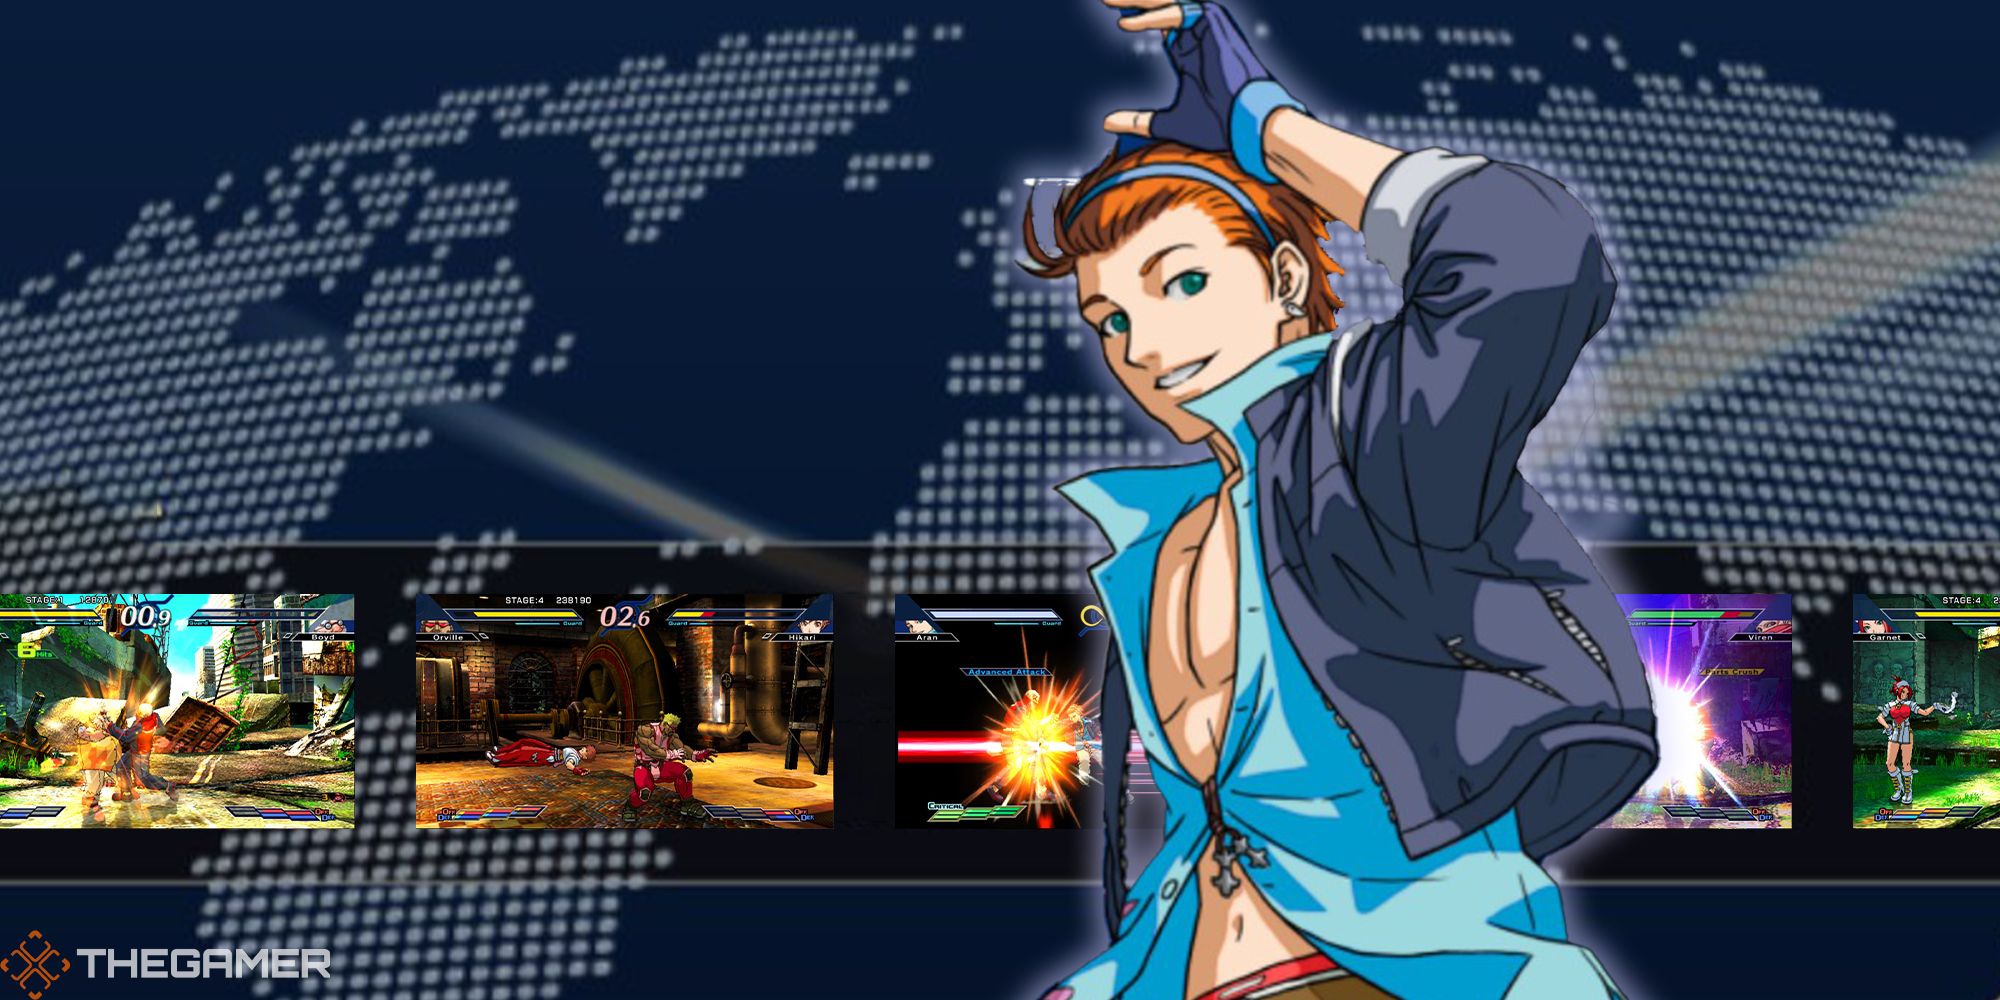 Aran stands against a globe featuring screenshots from The Rumble Fish 2.